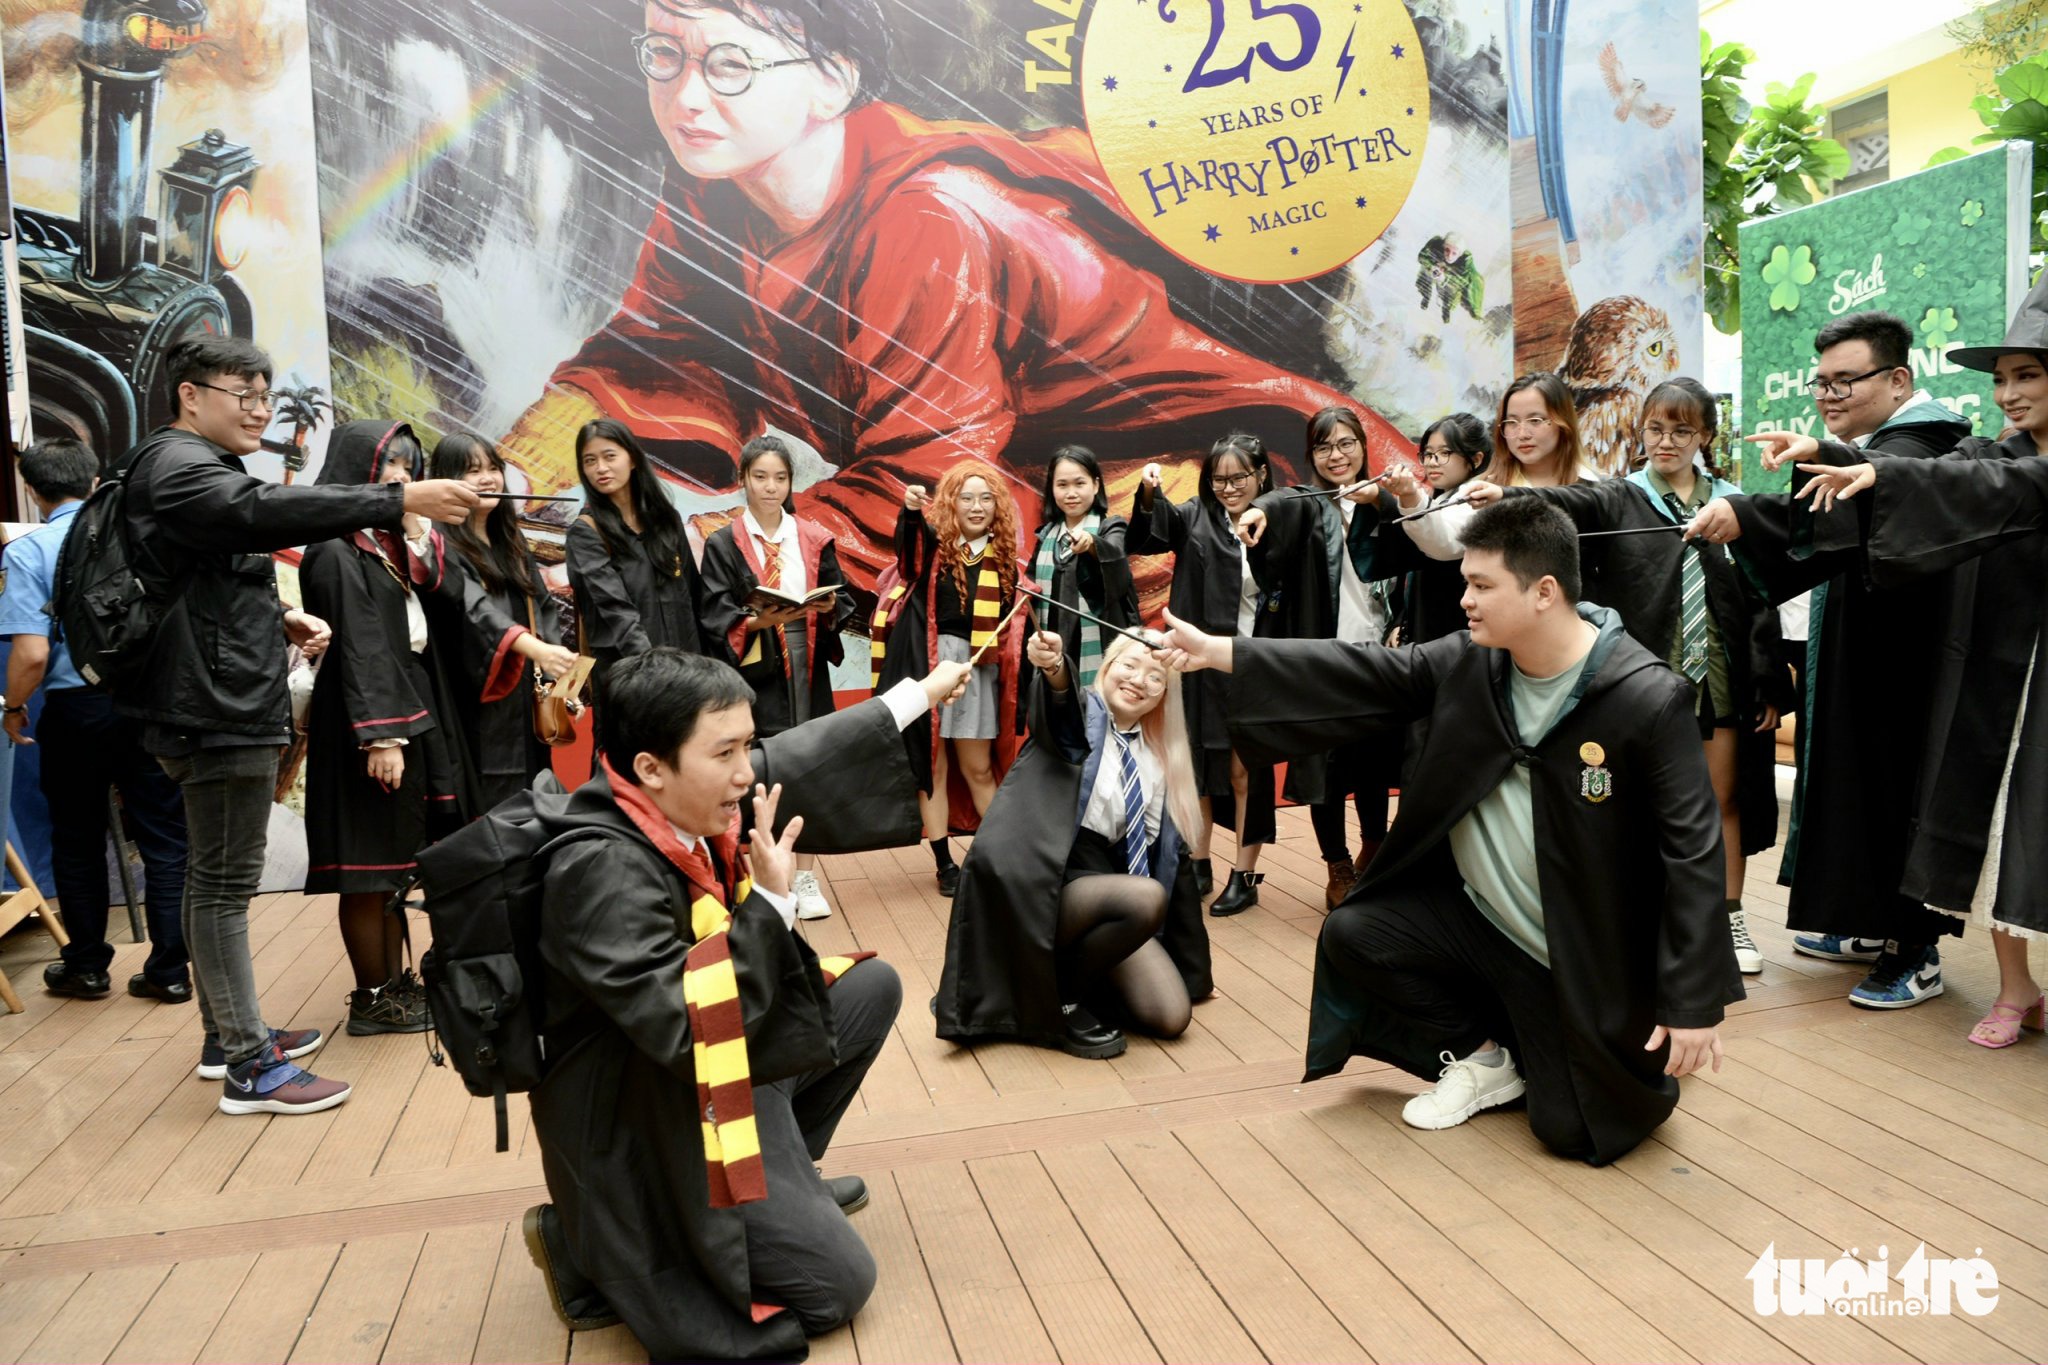 Young fans cosplaying as characters in Harry Potter books, a best-selling series by British author J.K. Rowling, pose for a photo at Nguyen Van Binh Book Street in Ho Chi Minh City, September 25, 2022. Photo: T.T.D. / Tuoi Tre